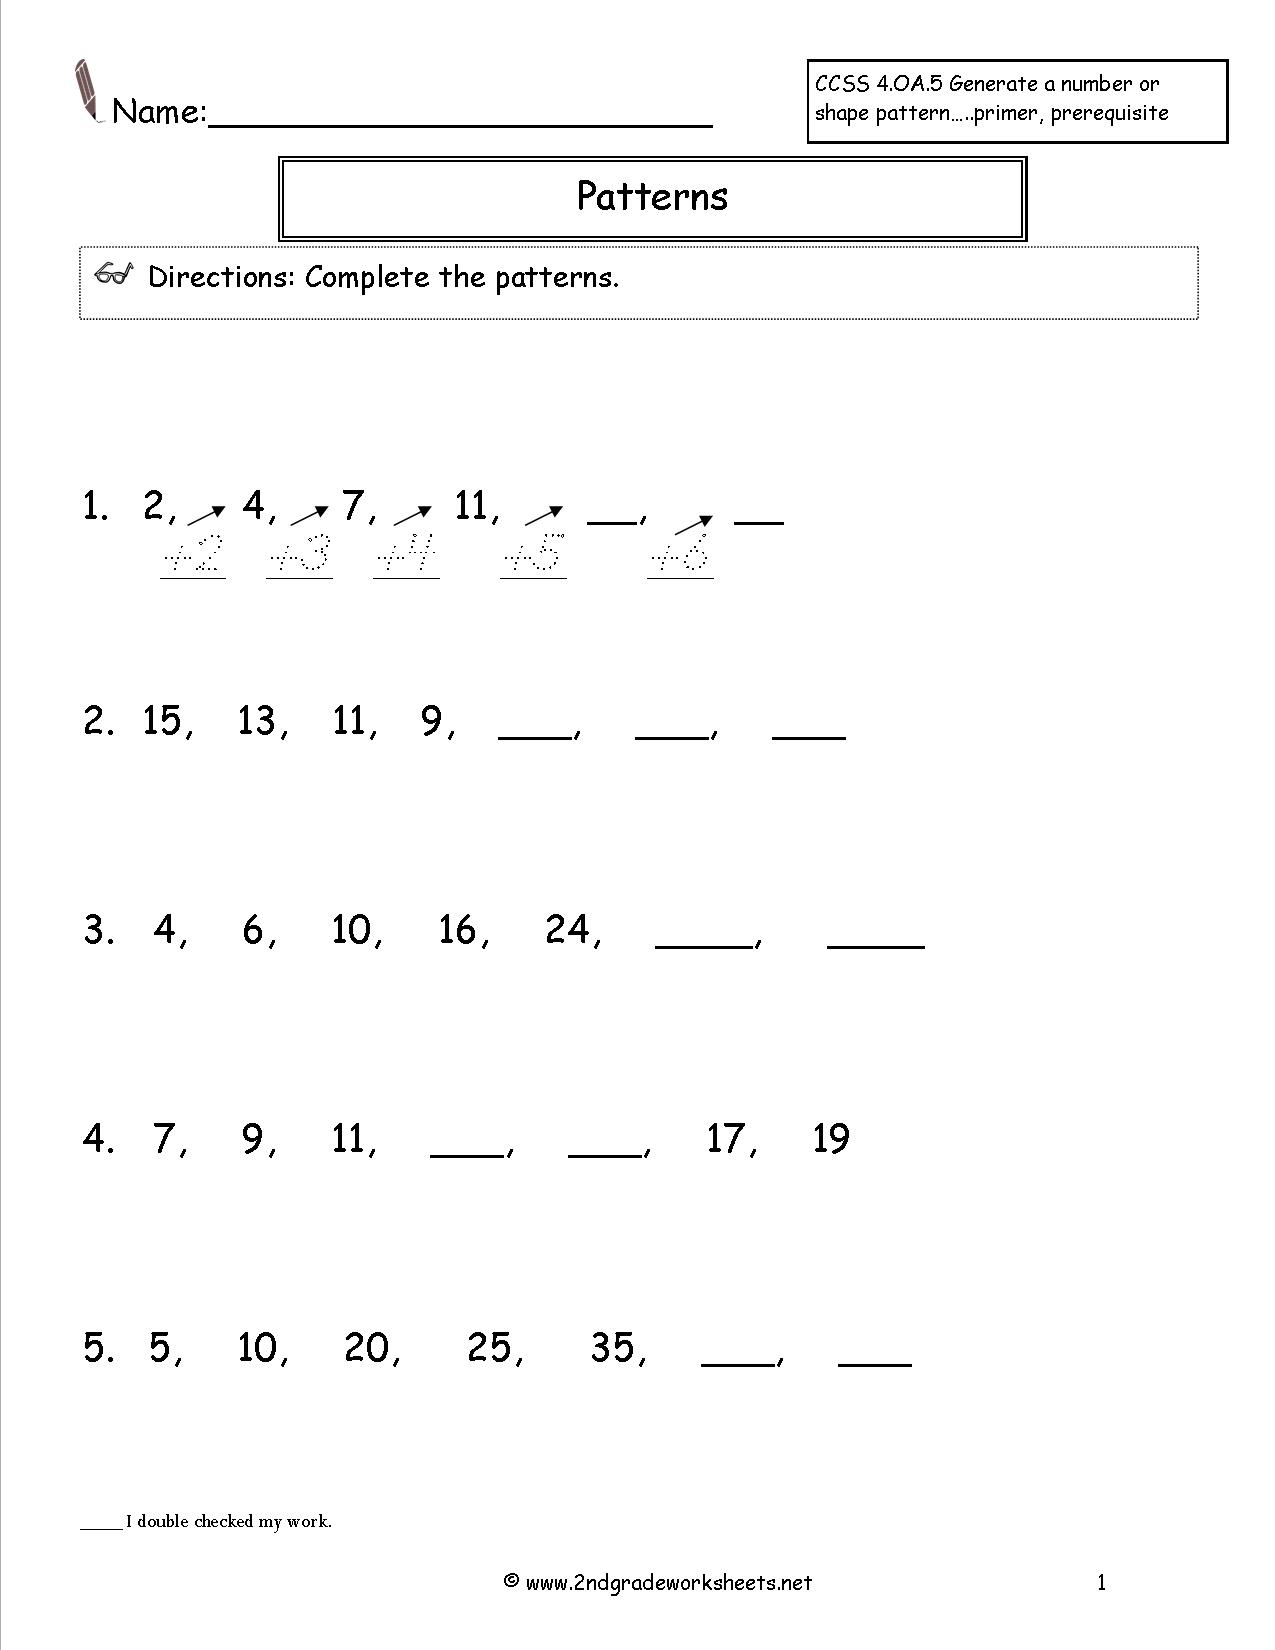 12 Best Images Of Geometric Math Patterns Worksheets Middle School High School Geometry Math